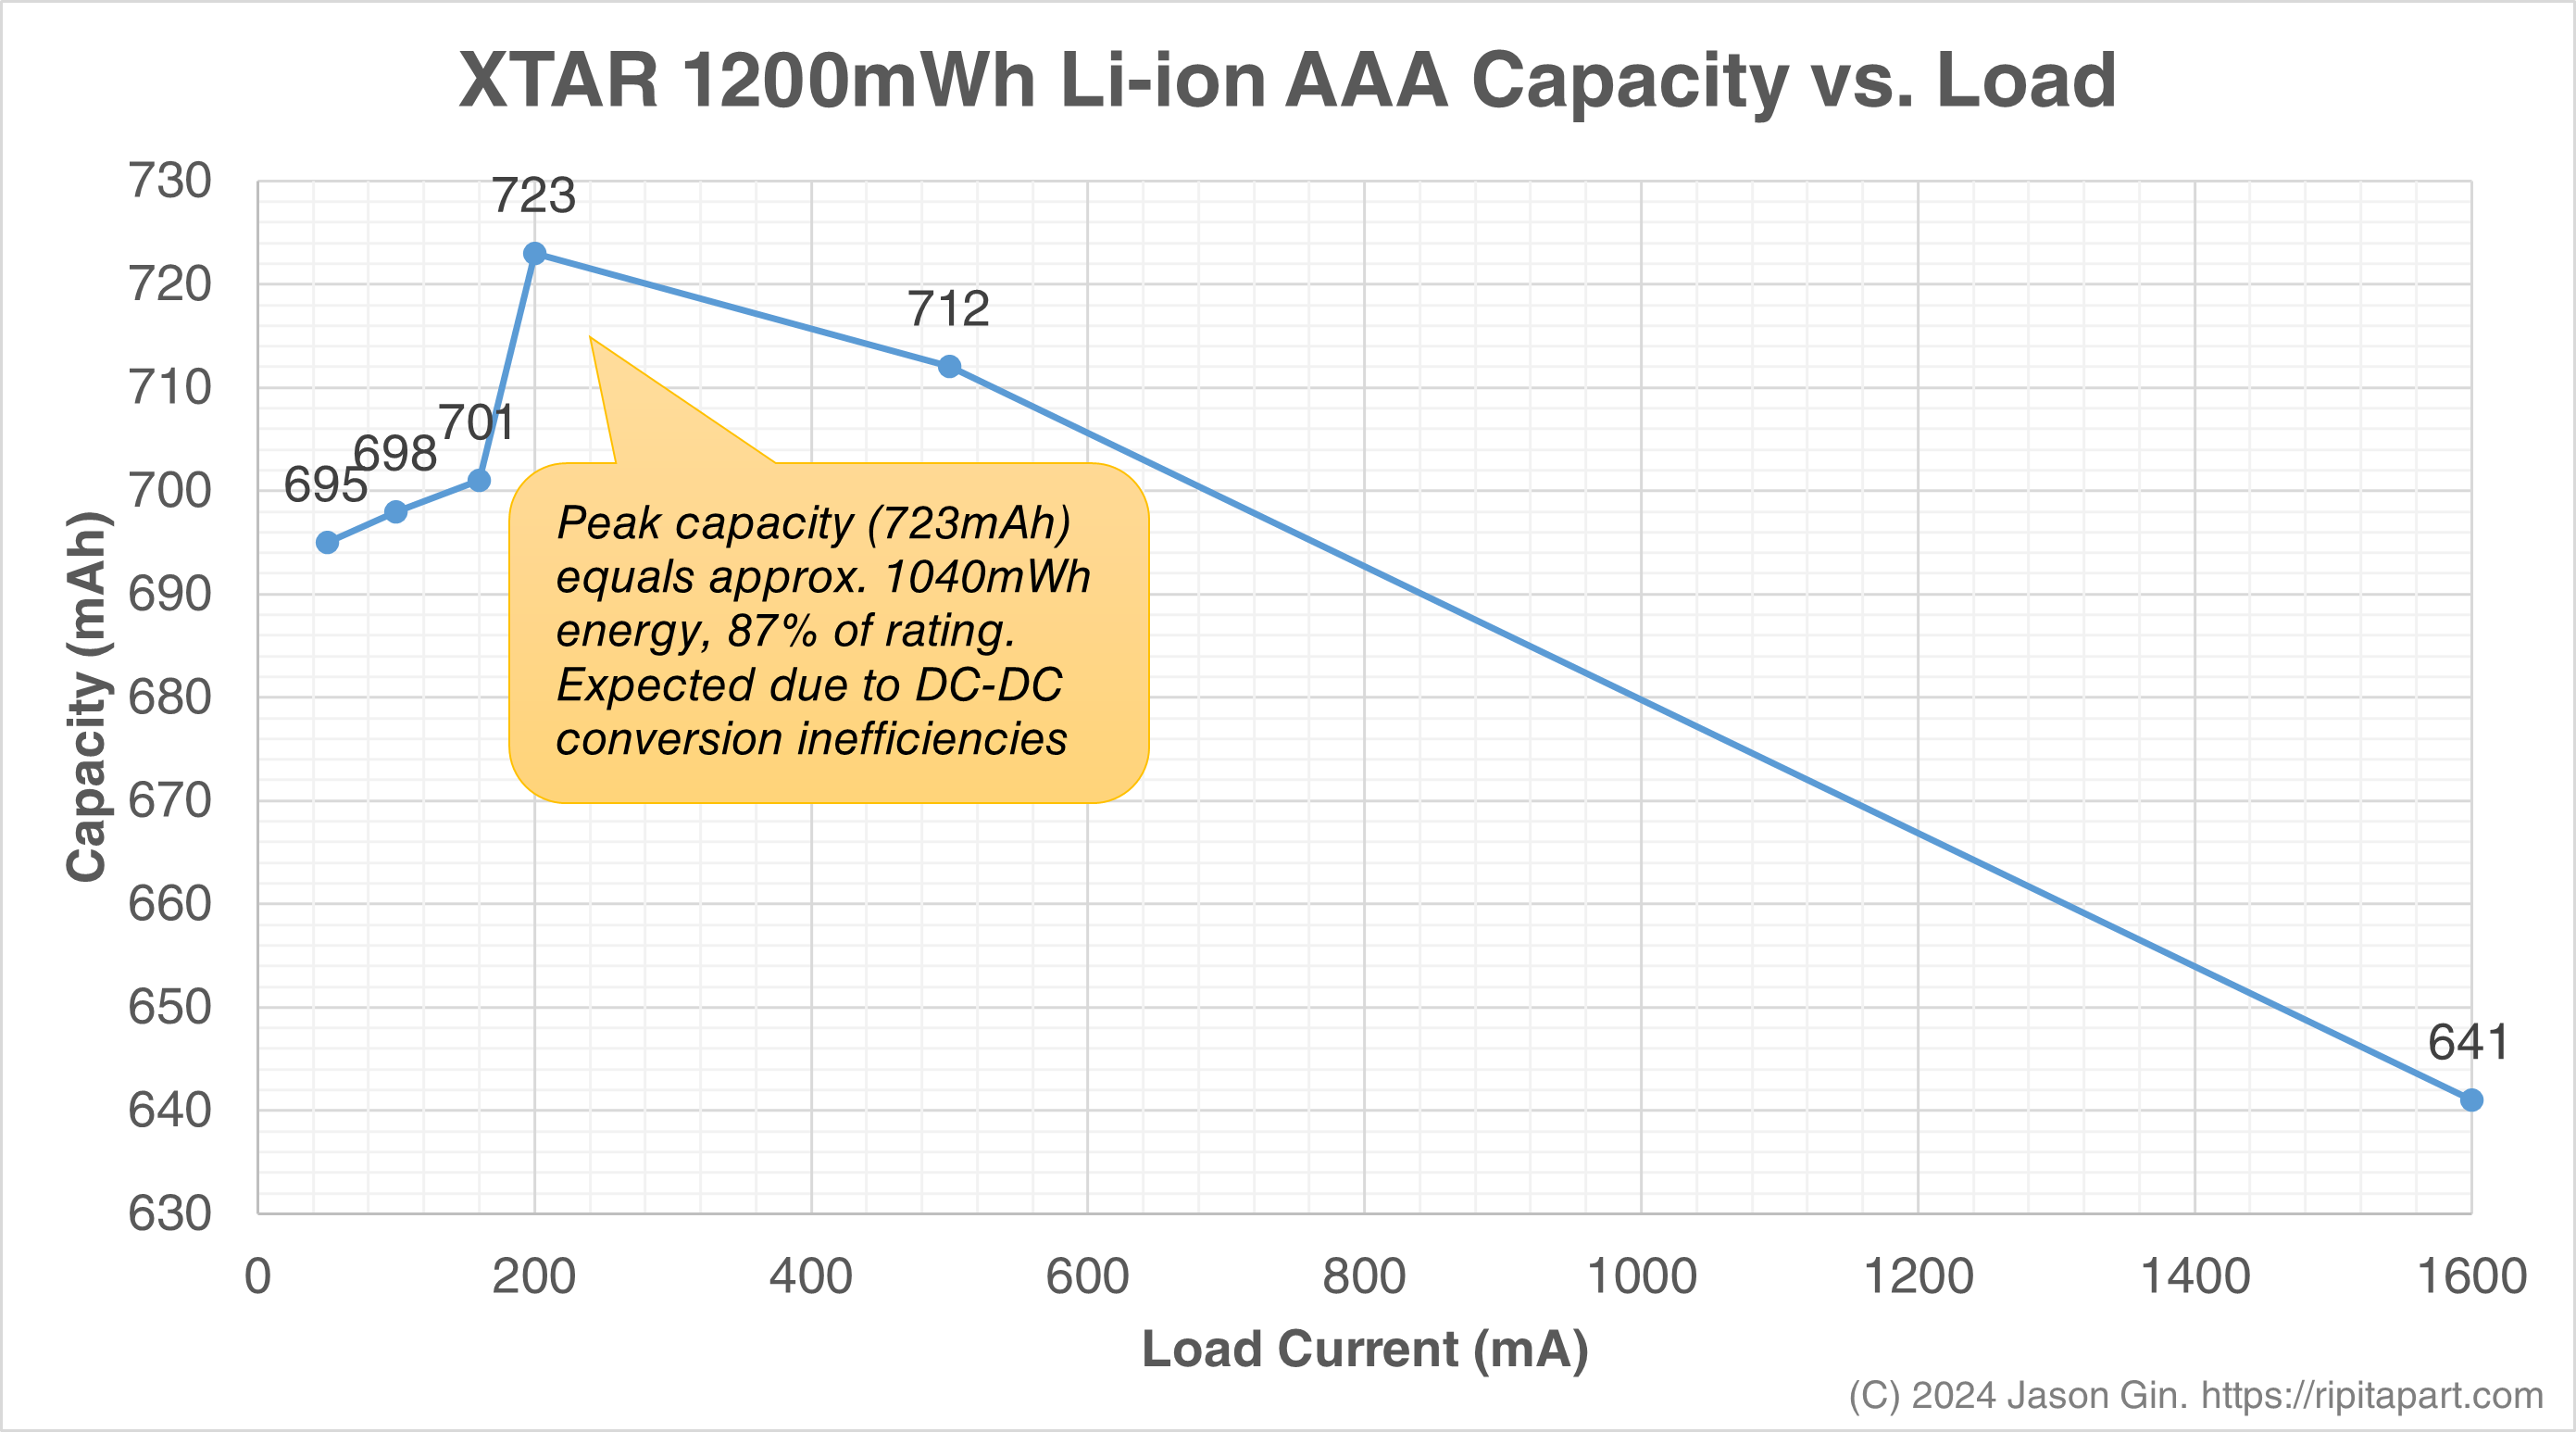 Chart showing the XTAR 1200mWh AAA Li-ion battery's capacity versus load current.